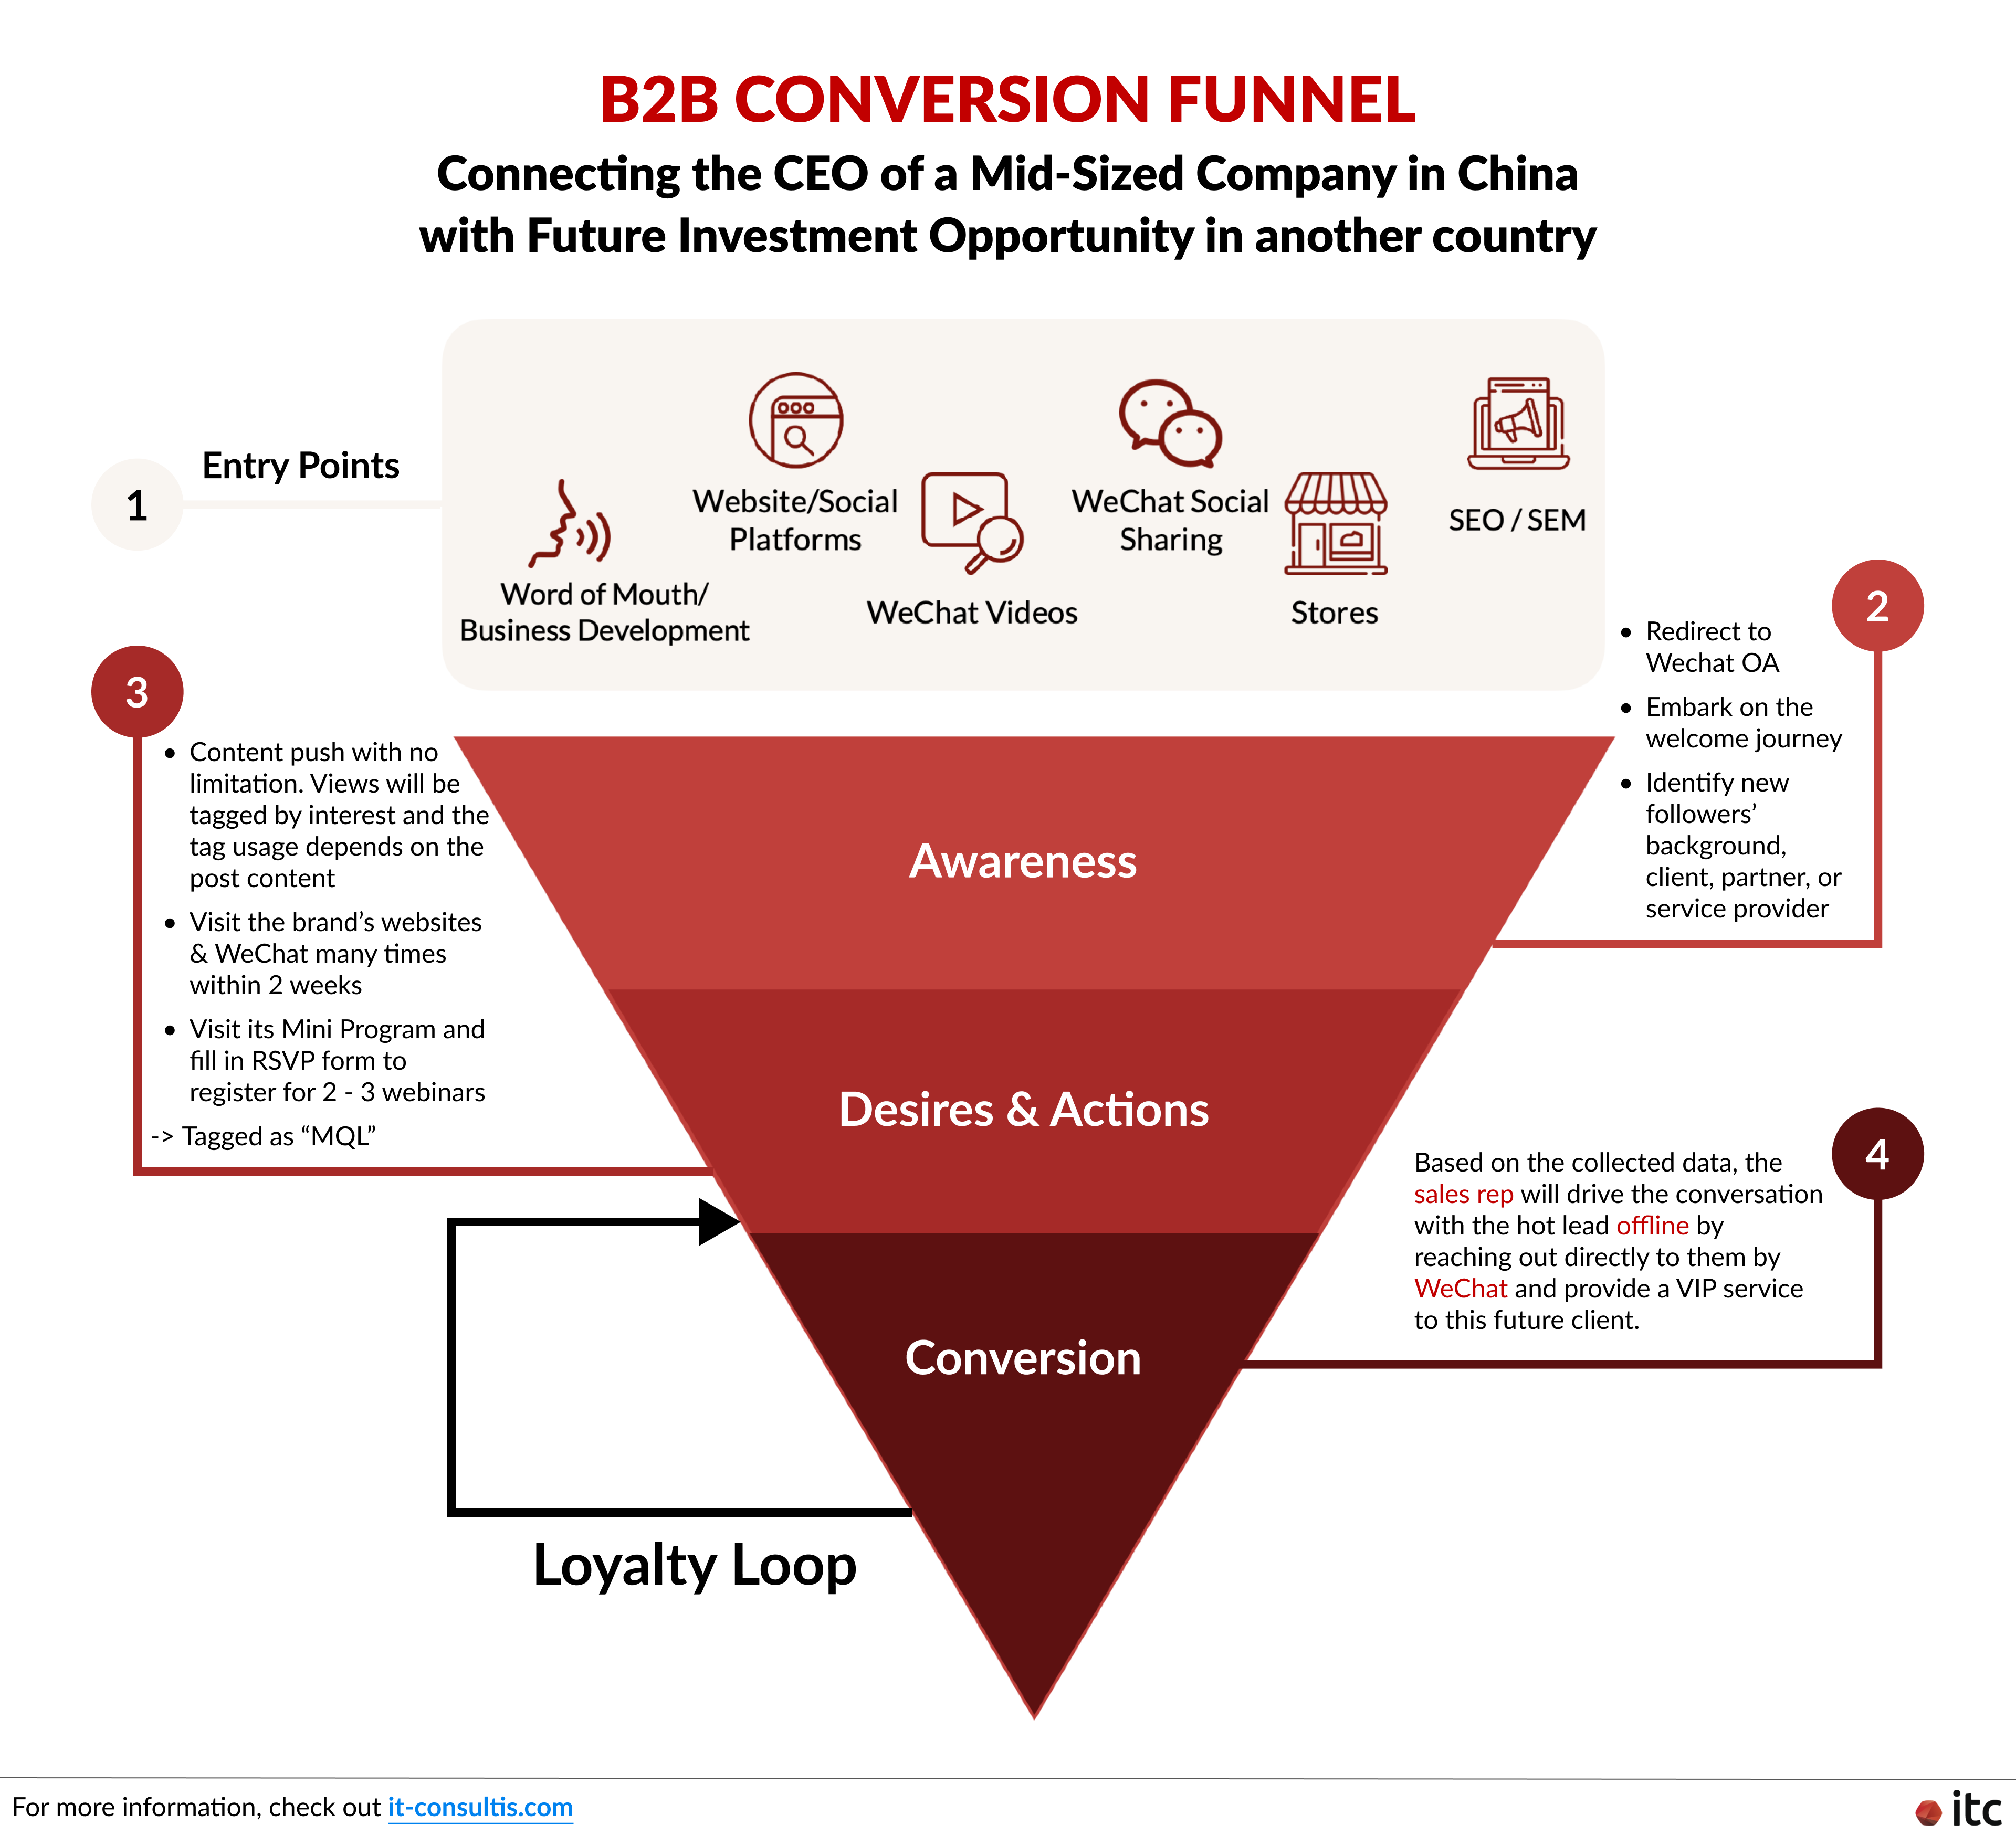 The B2B Conversion Funnel by leveraging social CRM and marketing automation to effectively enhance lead generation, data capturing, and sales conversion